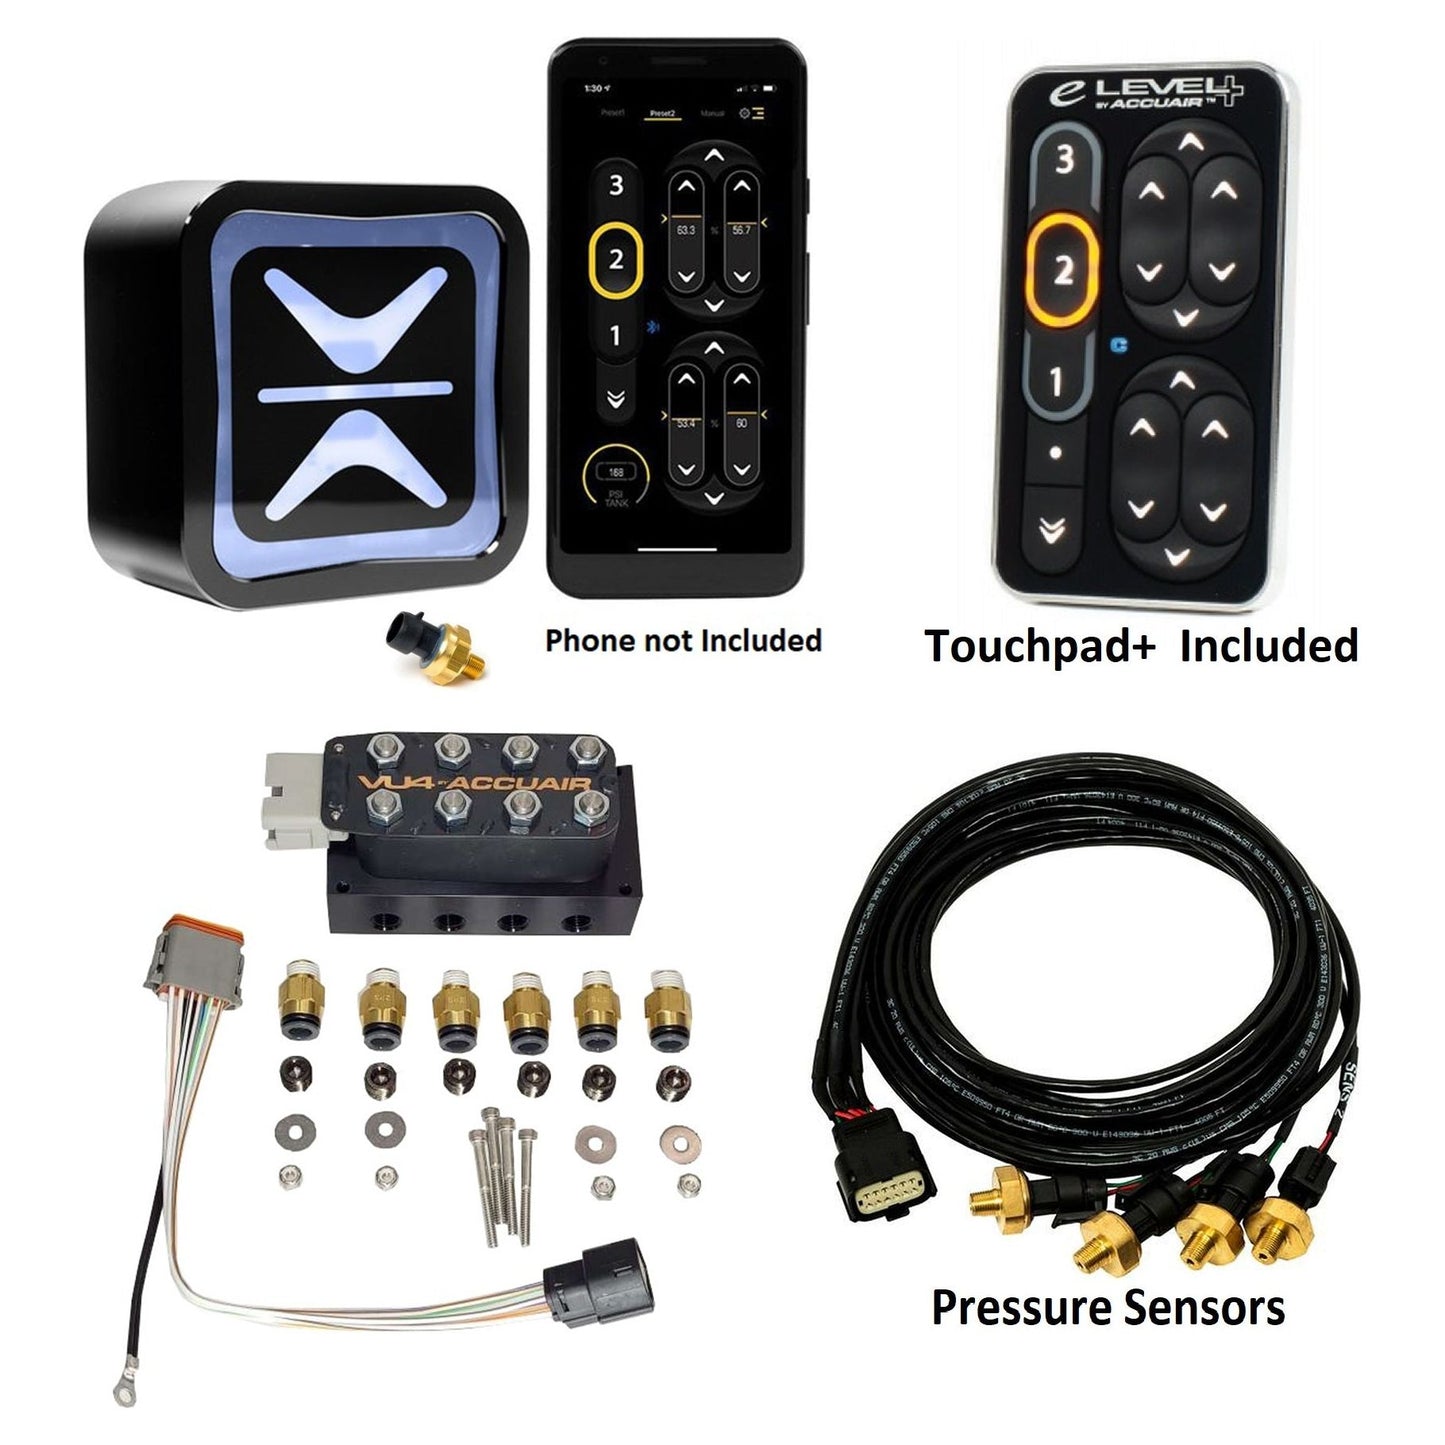 Accuair E+ Connect, touchpad, and pressure sensors